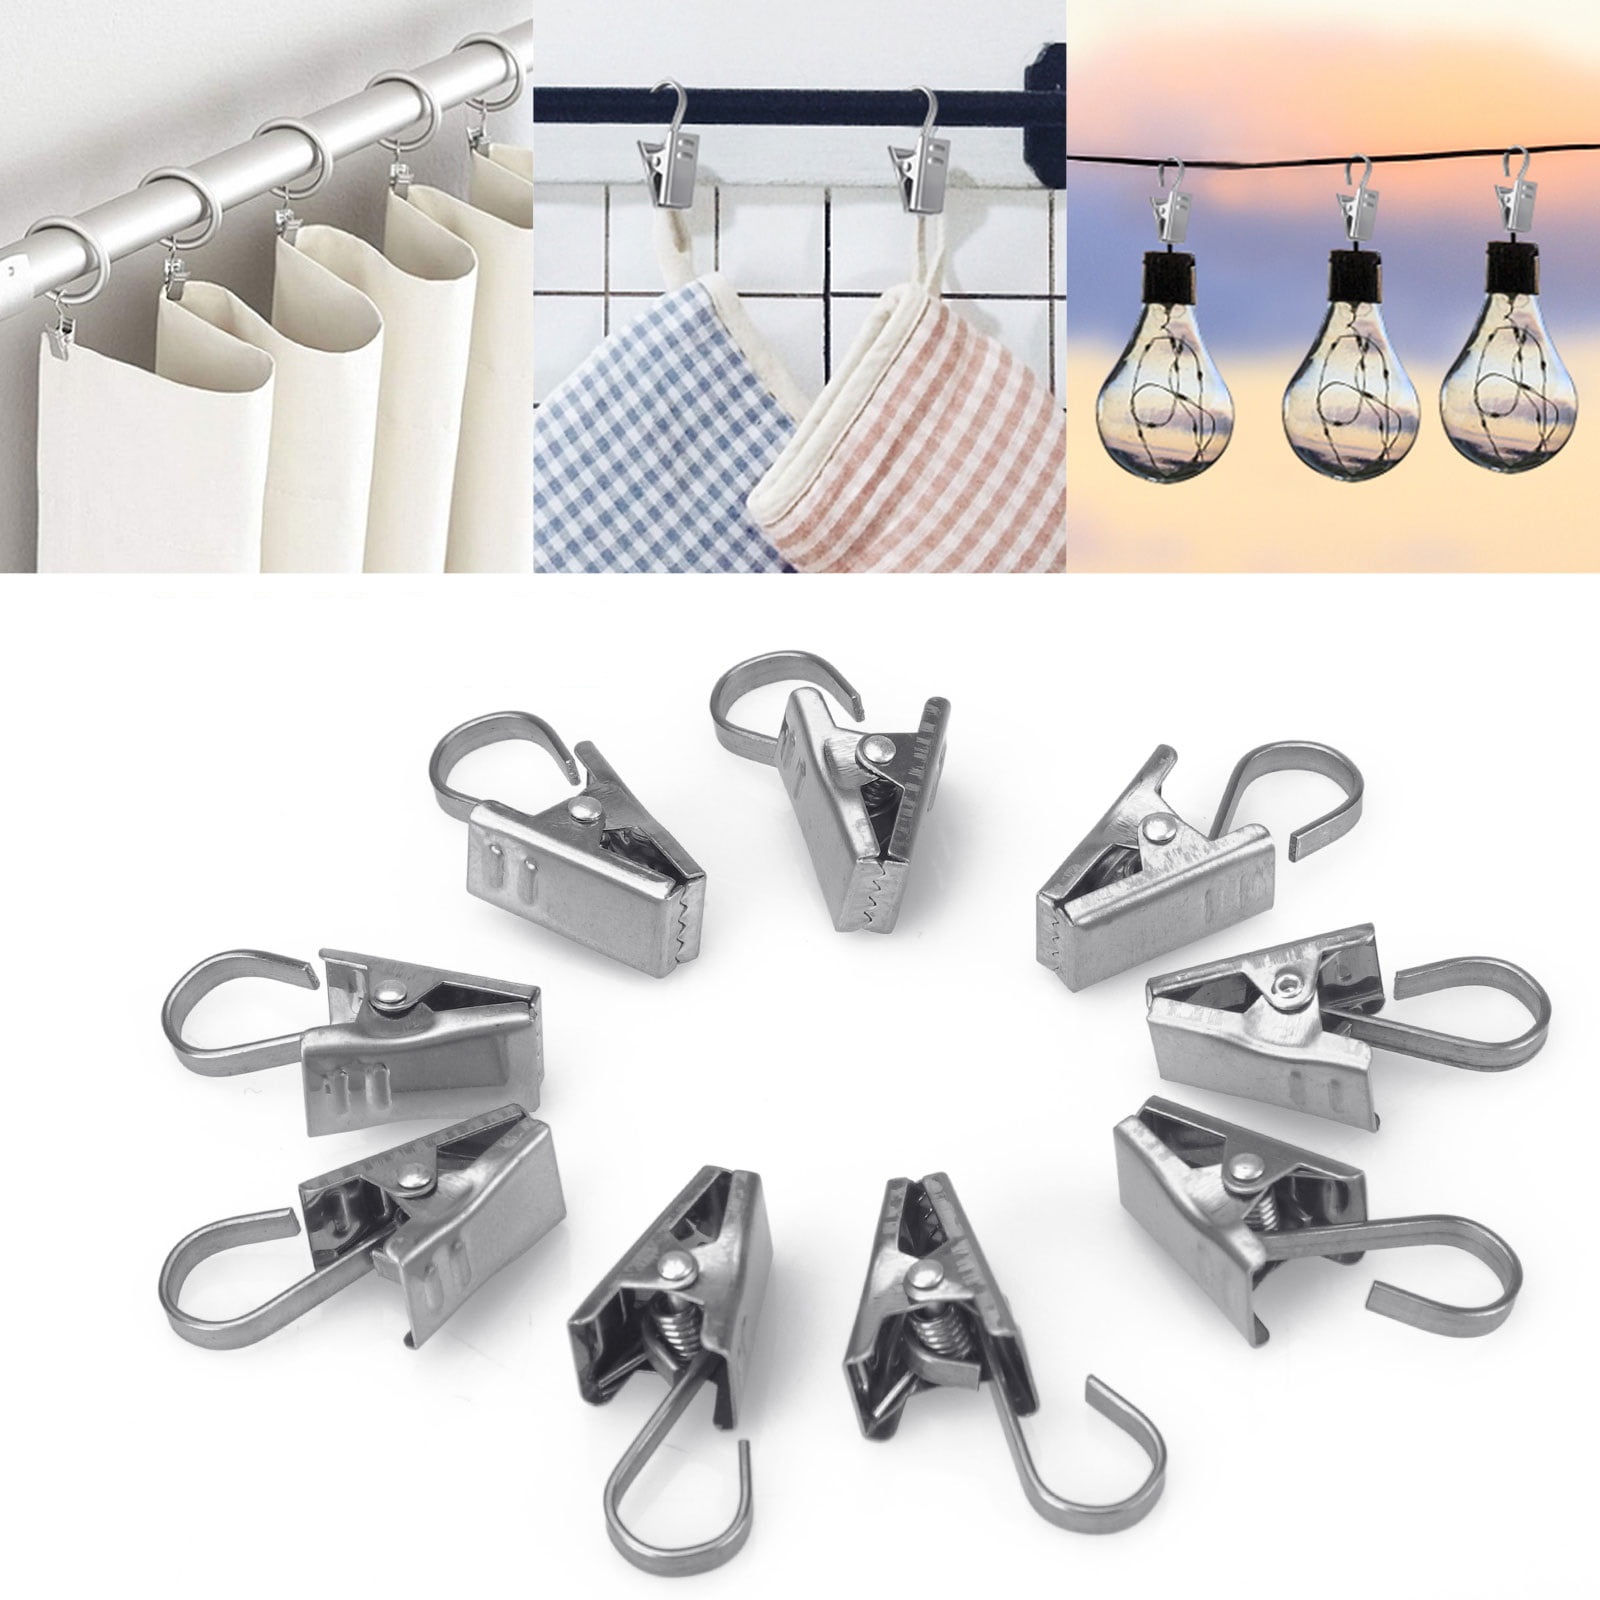 Wide Flat String Party Lights Hanger Wire Holder for Shower Hi Collie 30pcs Stainless Steel Clips w/Hook for Curtain Art Craft Display and Outdoor Activities Supplies Photos Home Decoration 